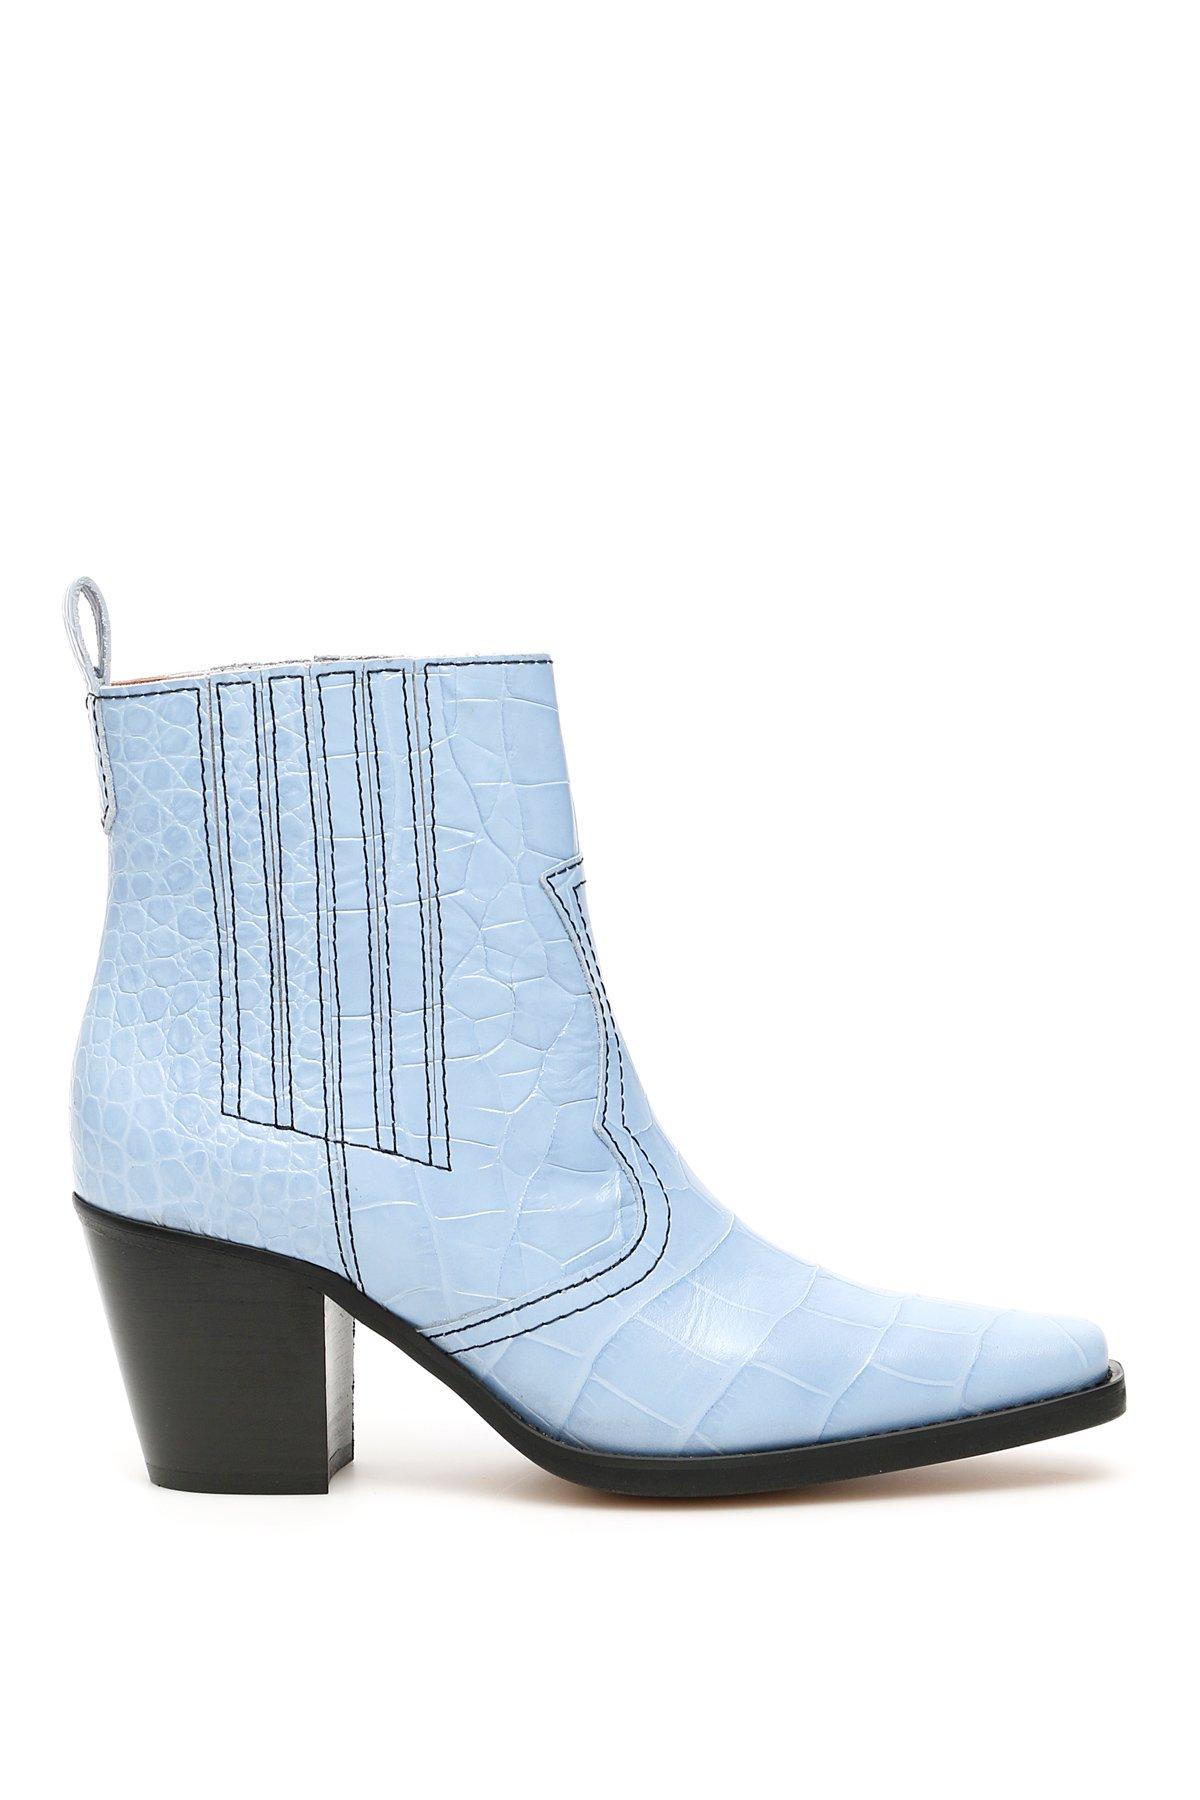 Ganni Leather Western Ankle Boots in Blue - Lyst